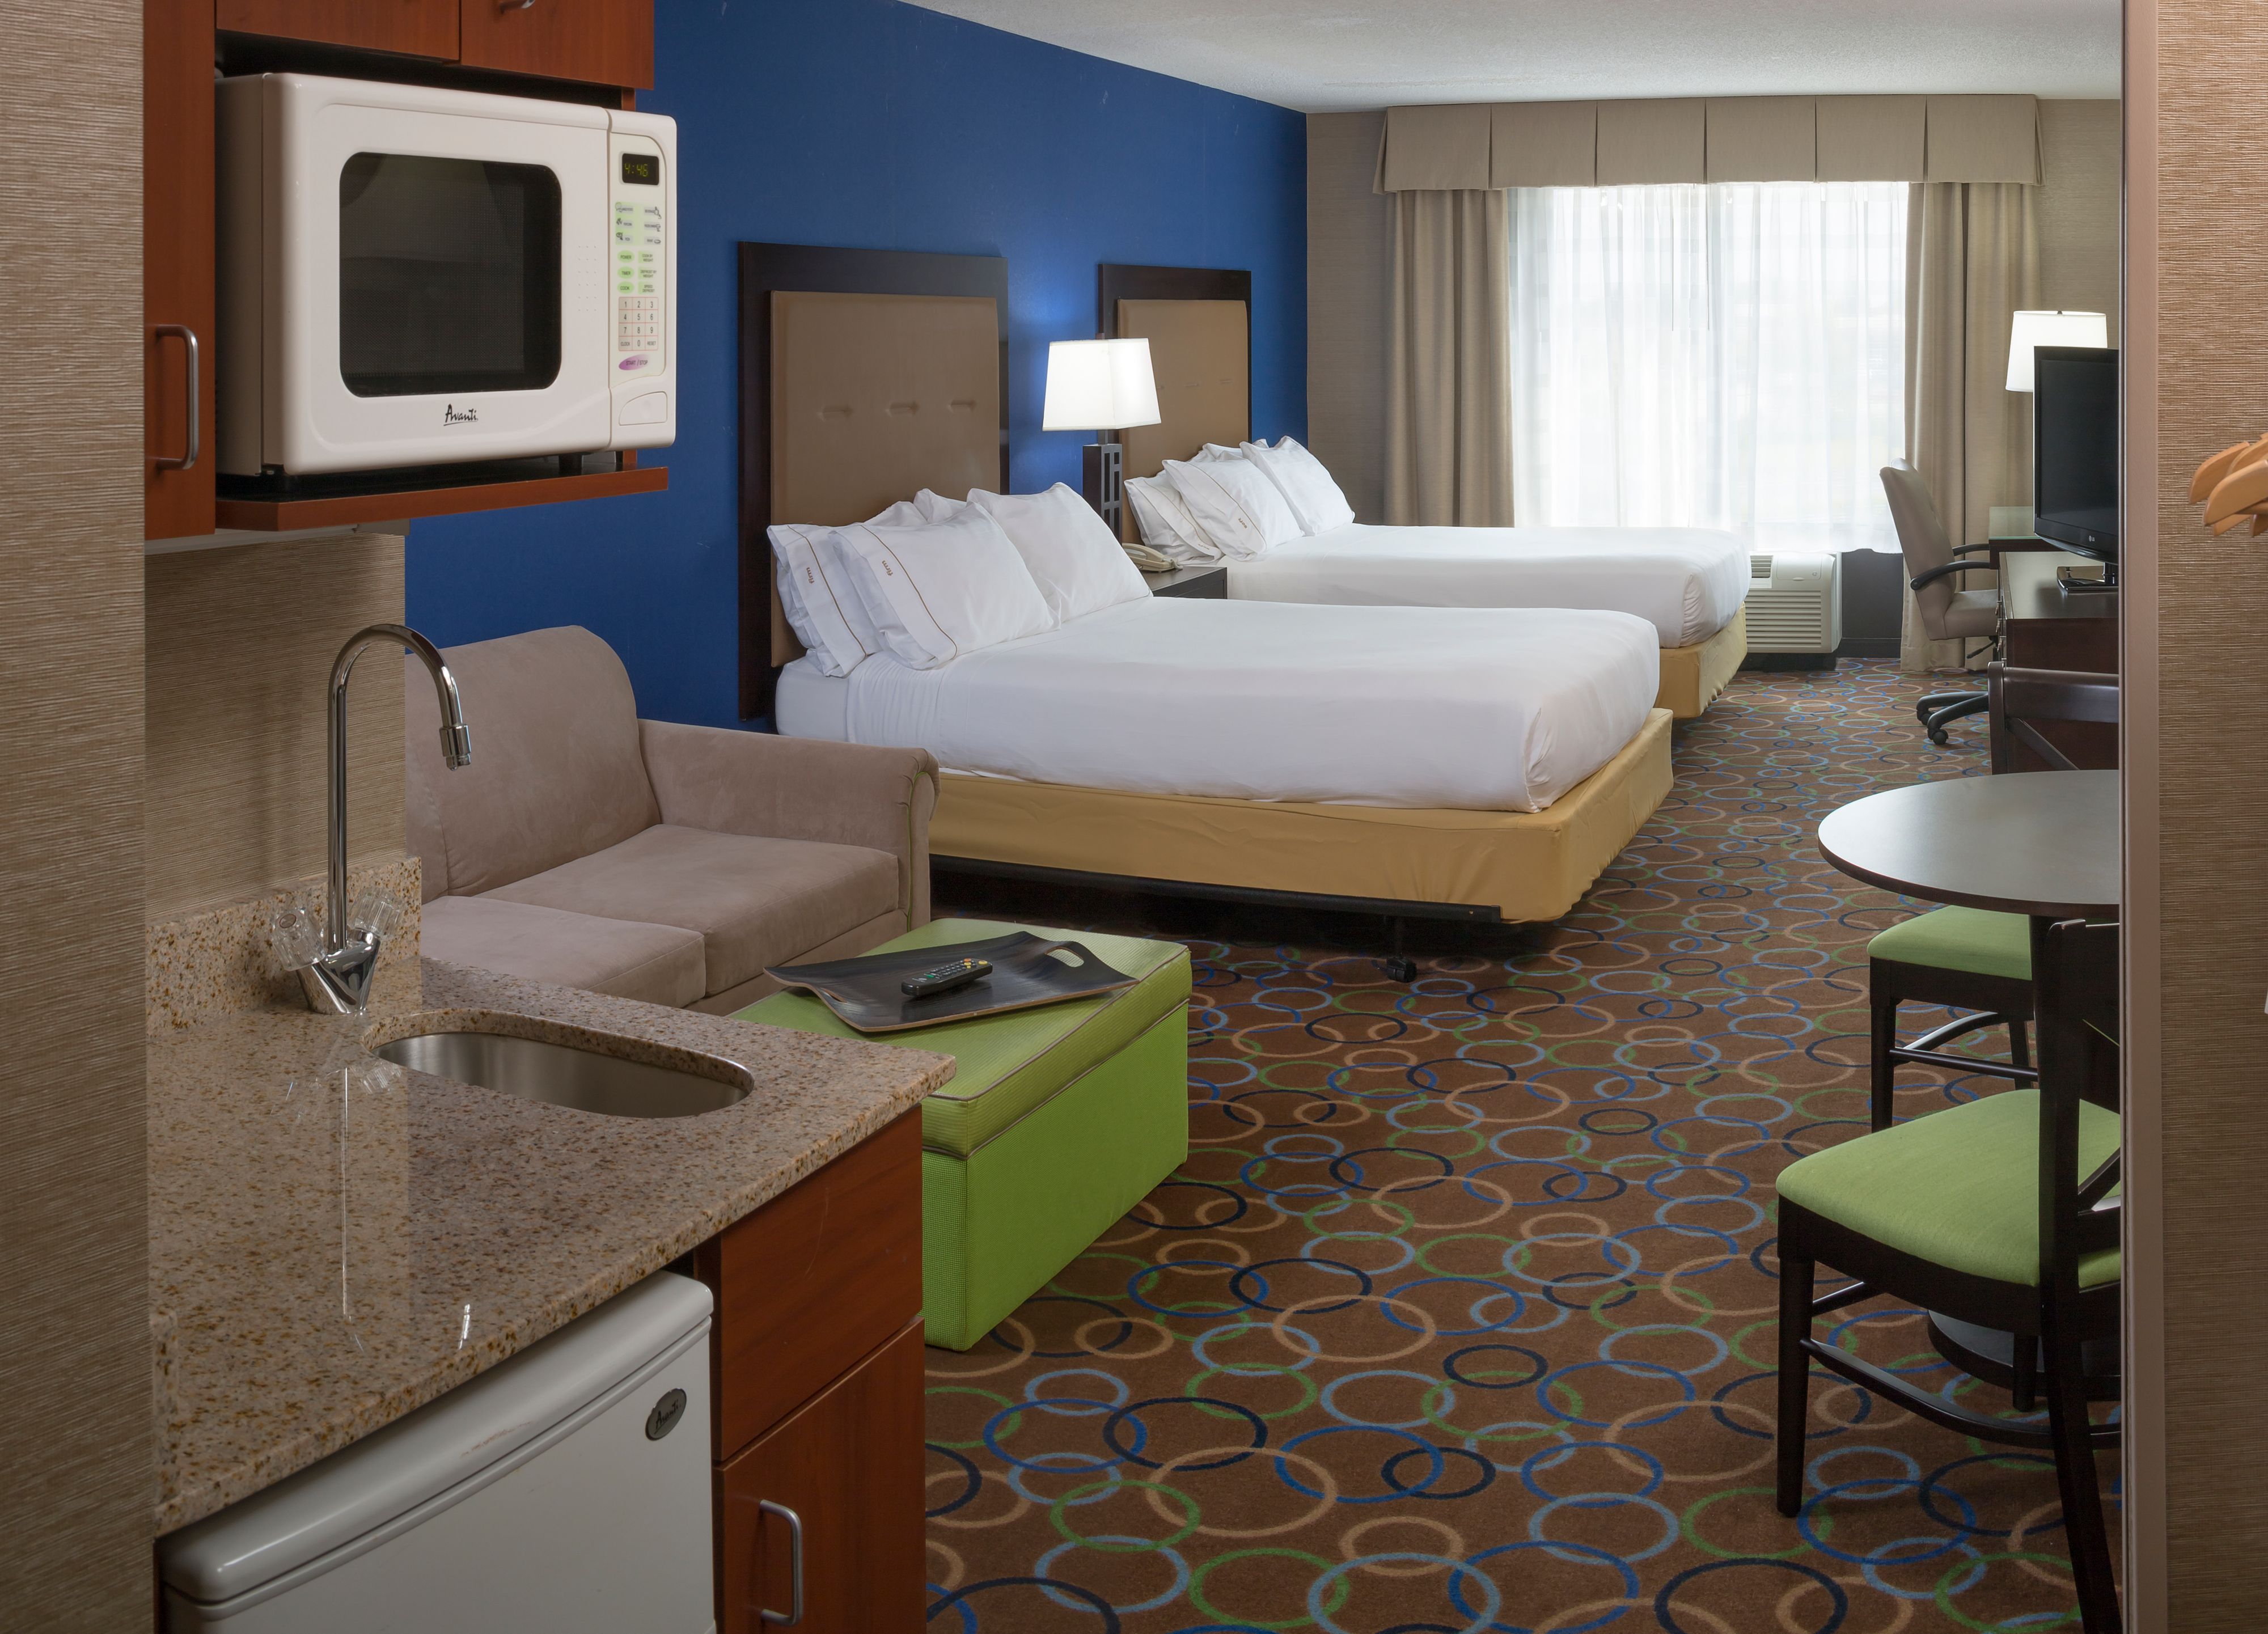 holiday-inn-express-and-suites-manchester-4043552227-original.jpg